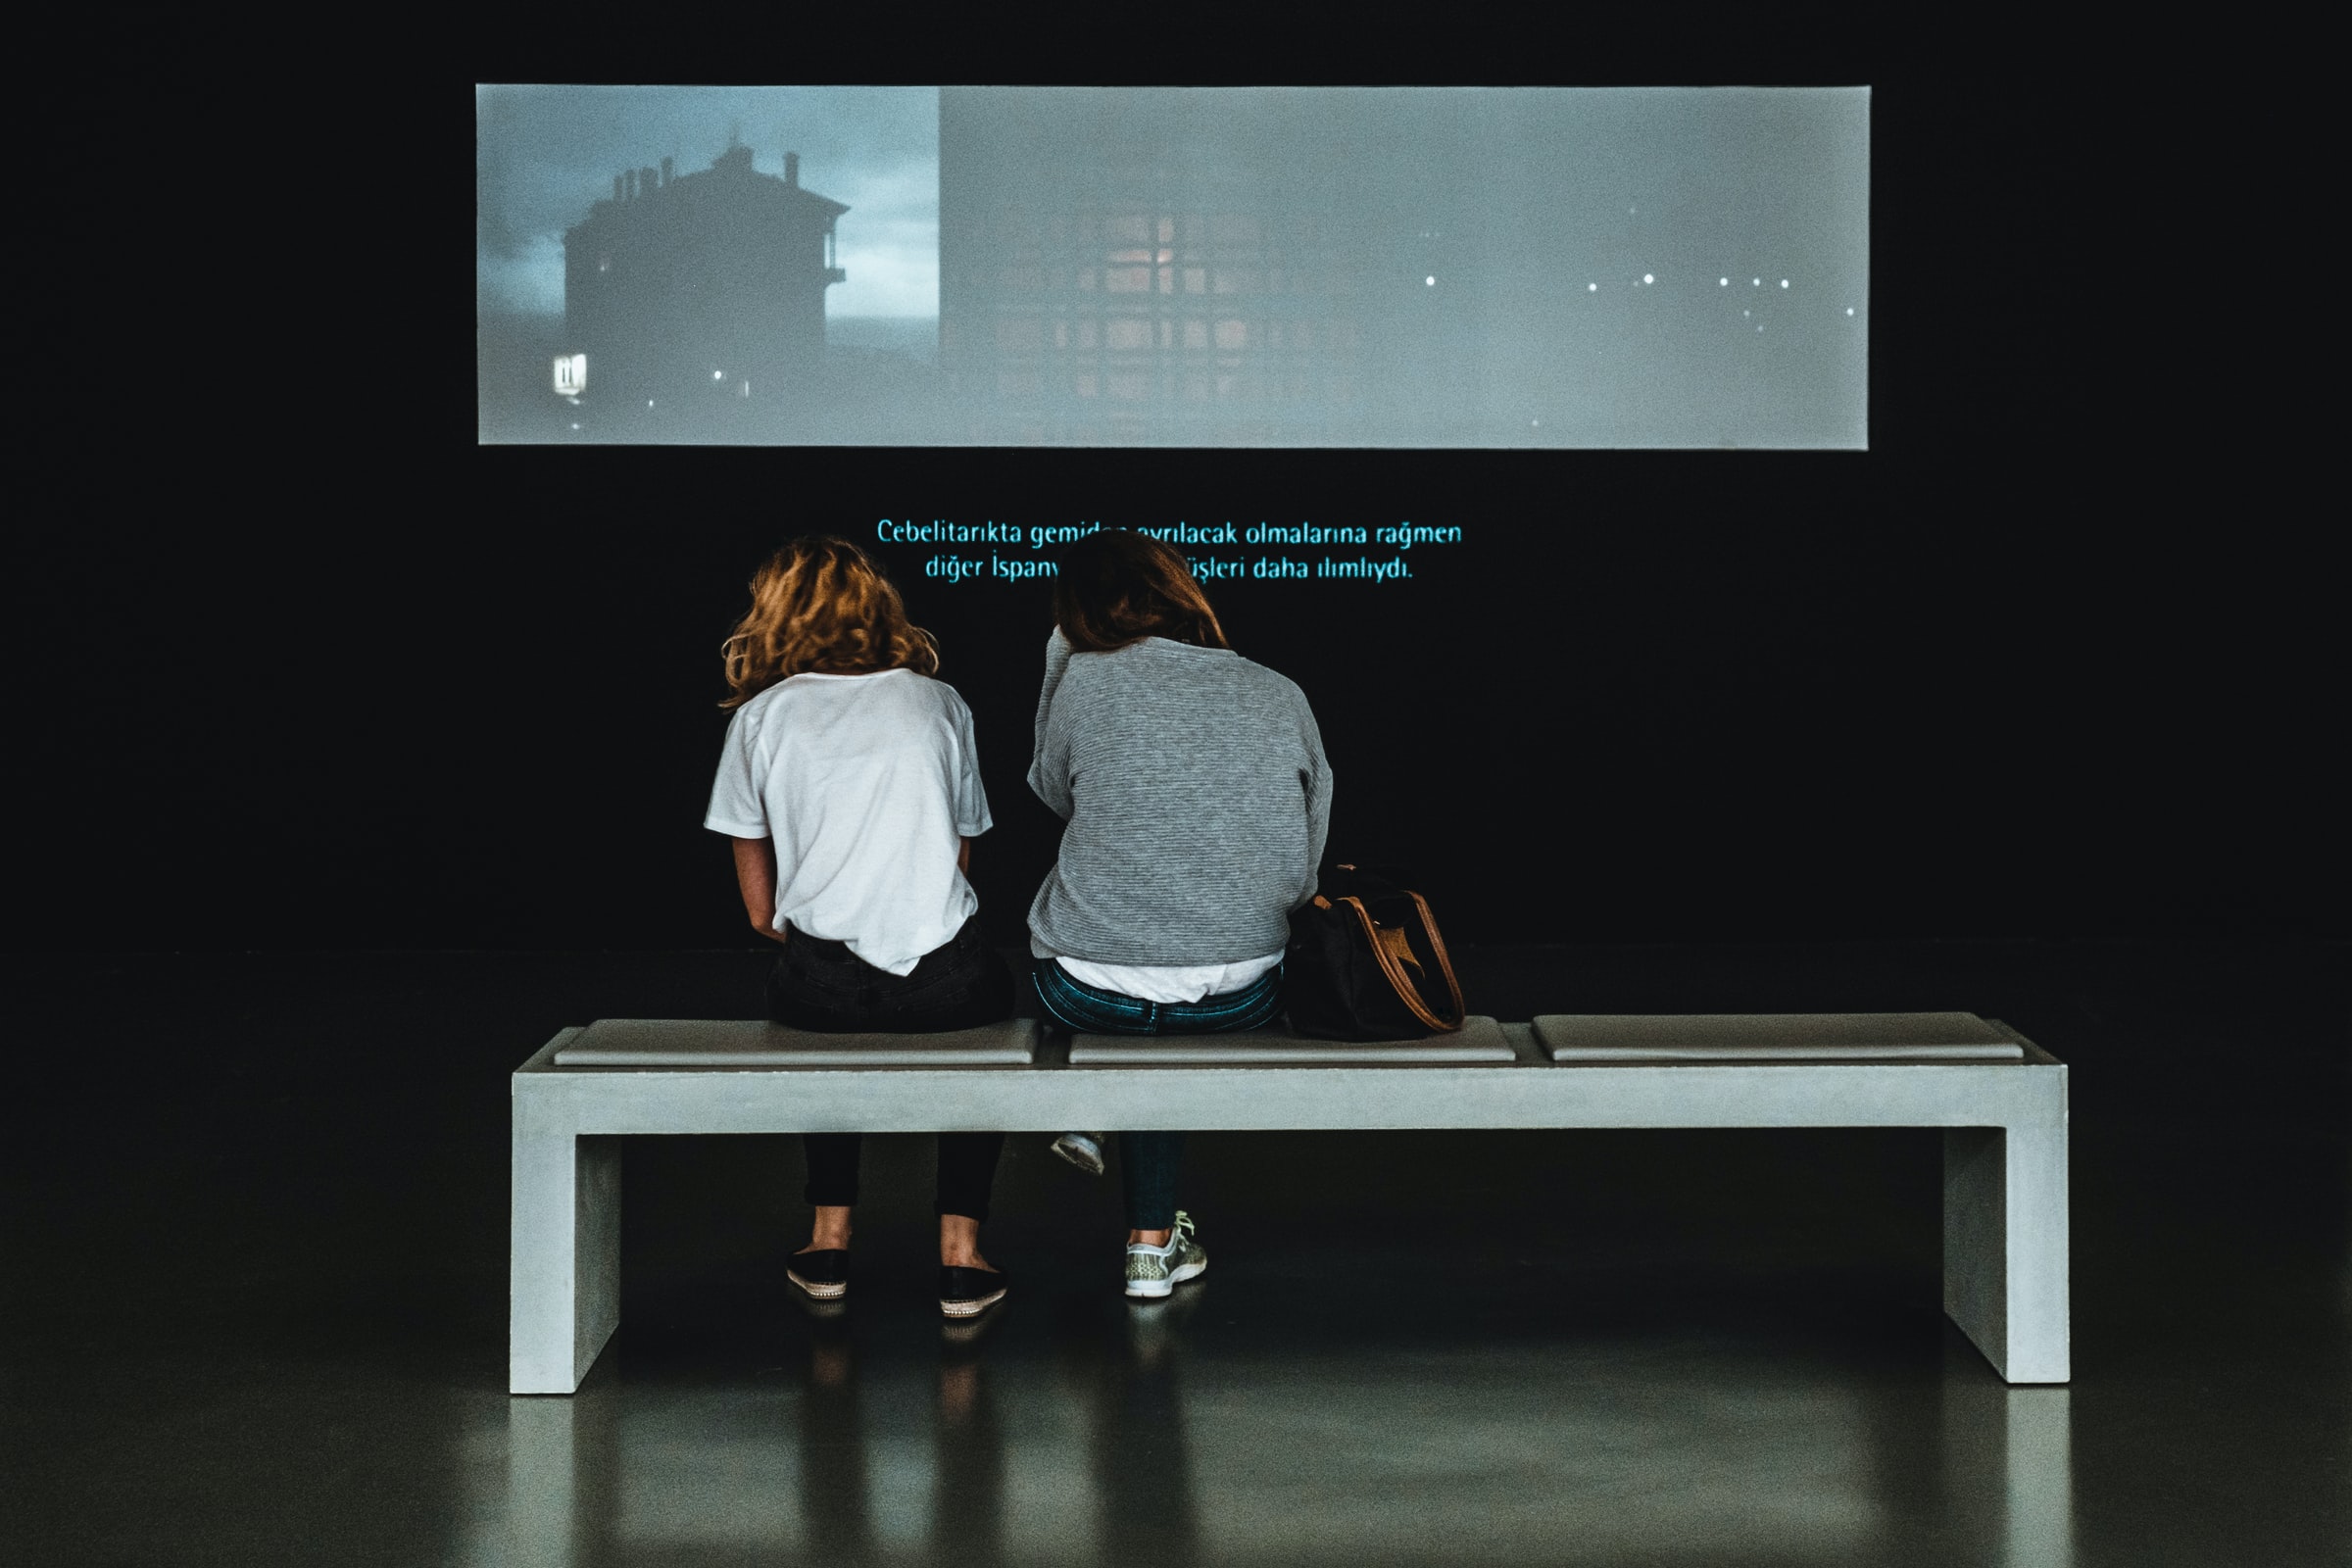 two women sitting in front of a screen with subtitles displayed